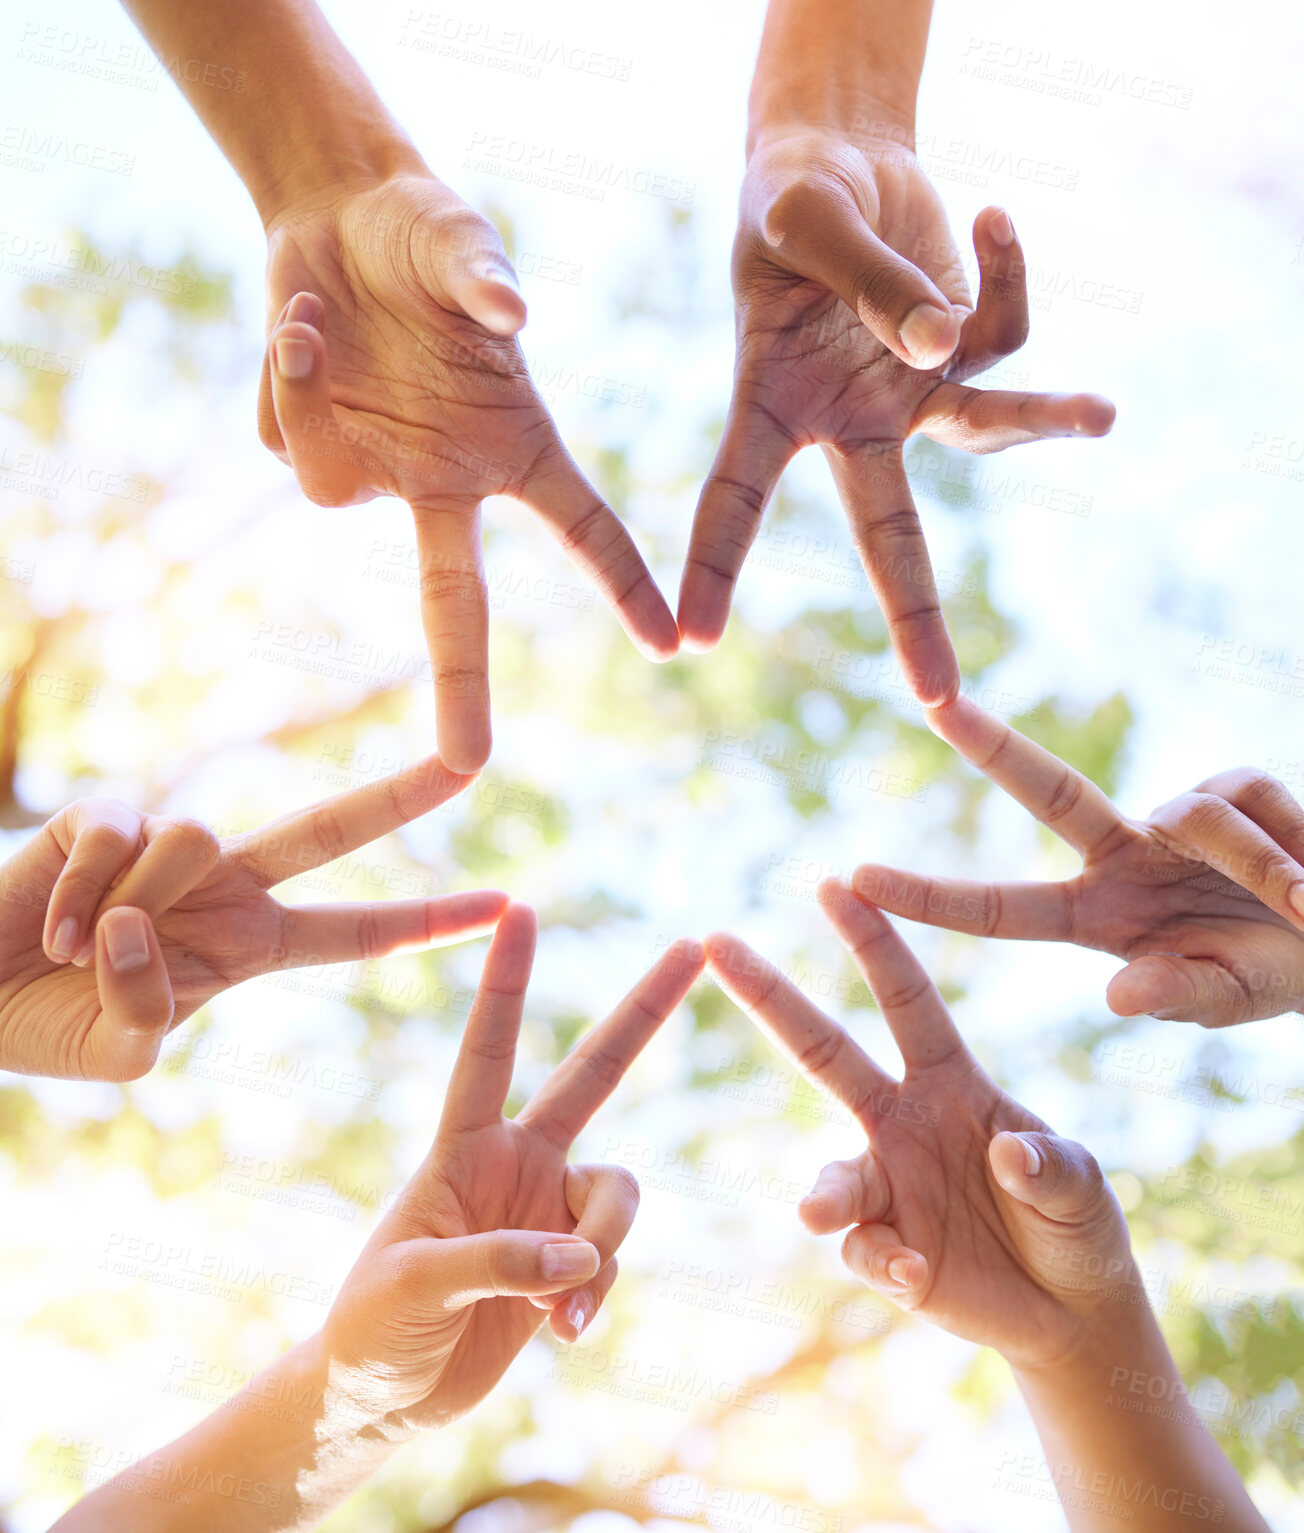 Buy stock photo Hands together, star sign and team sun gesture with hand to show group work and community. Outdoor, lens flare and below of people doing teamwork with friends showing commitment and solidarity 